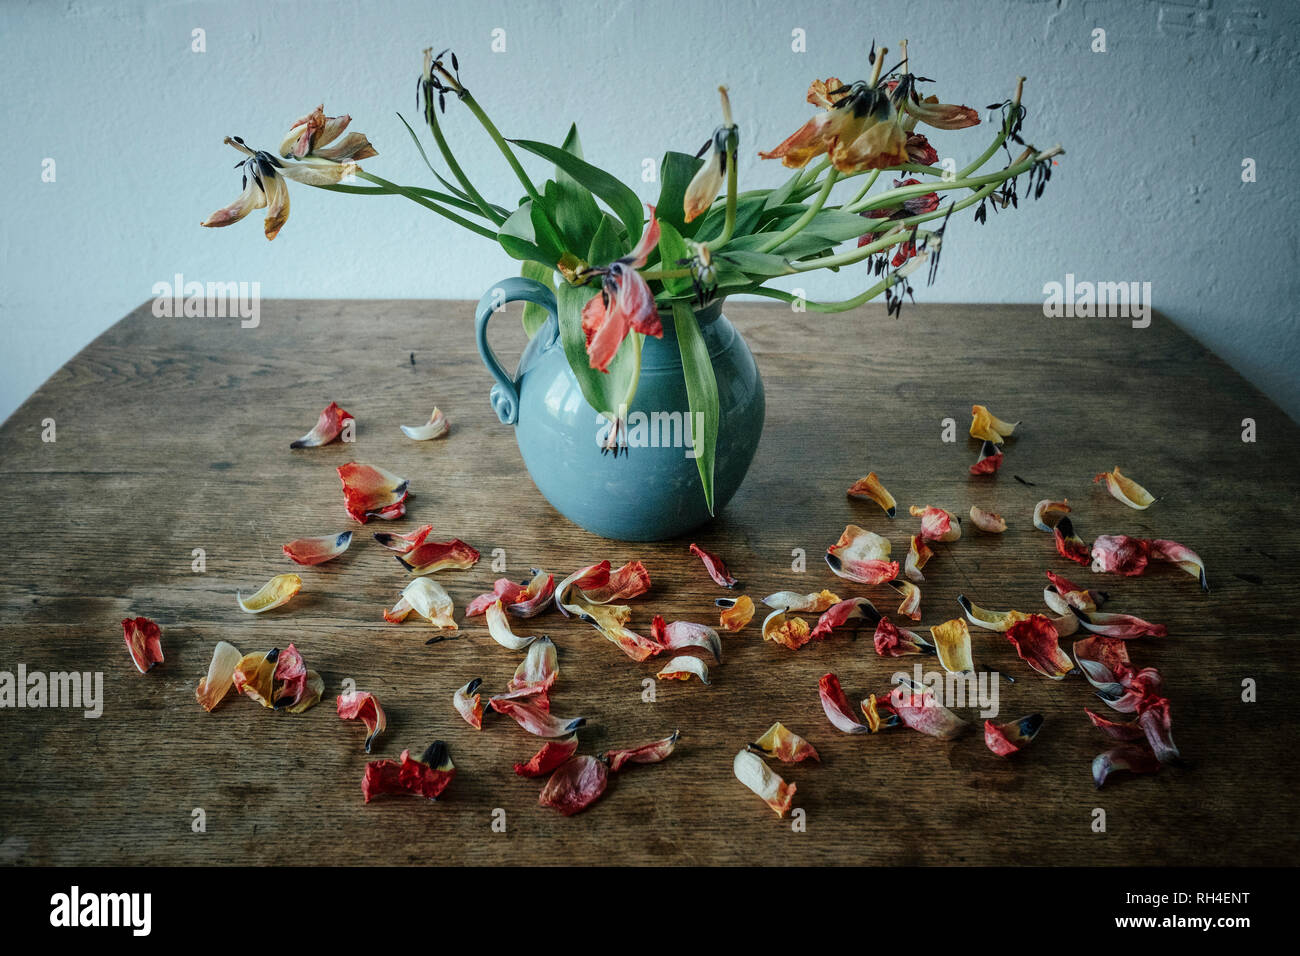 Dead flower petals falling from stems in vase Stock Photo